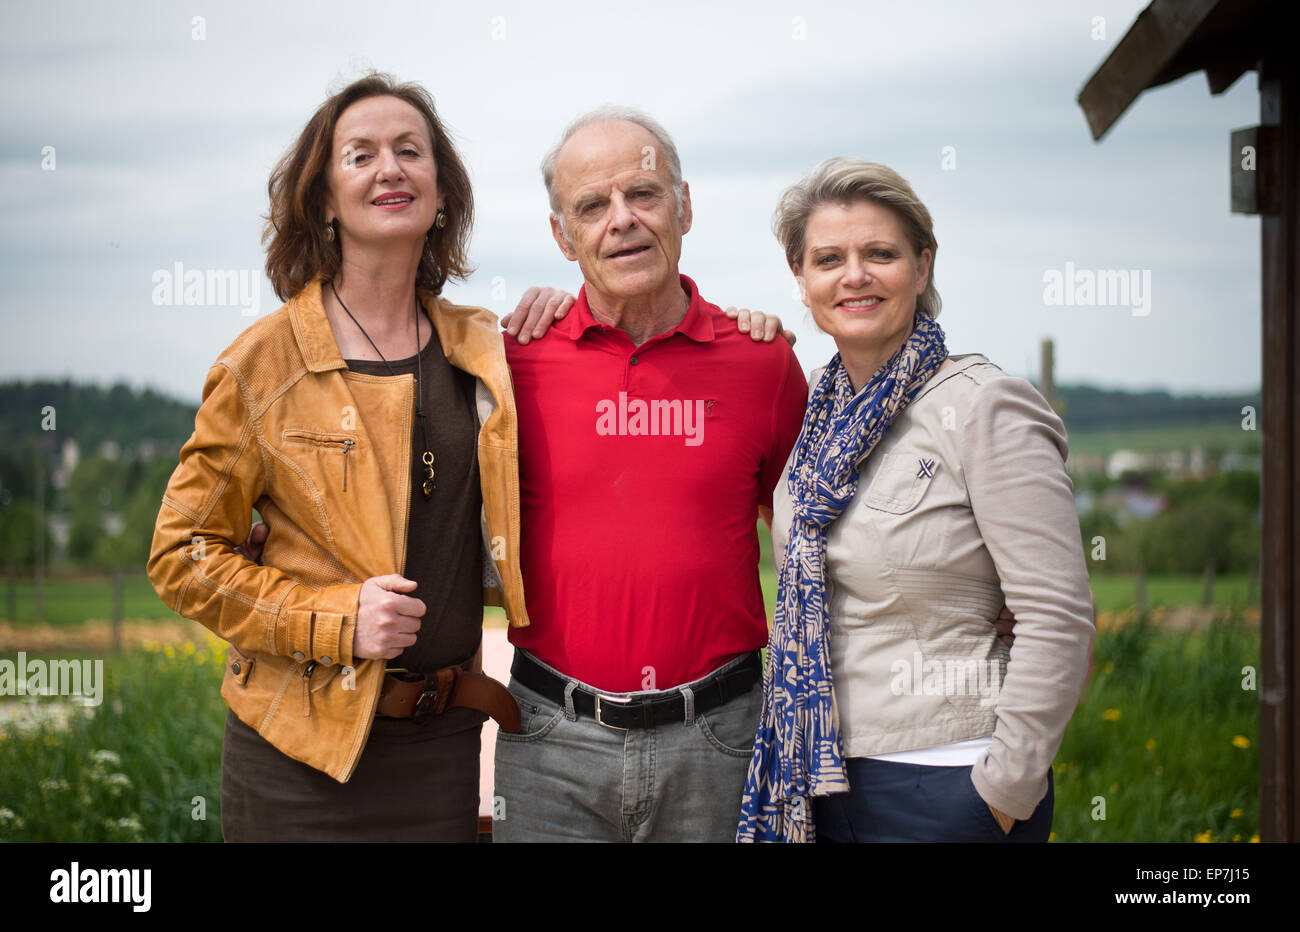 Muensingen, Germany. 14th May, 2015. Actors Irene Fischer (L-R, Anna Ziegler), Knut Hinz (Hans-Joachim Scholz), and Andrea Spatzek (Gabi Zenker) pose in Muensingen, Germany, 14 May 2015. A celebratory linden tree was planted for the 30th birthday of the well known ARD series 'Lindenstrasse.' Photo: DANIEL NAUPOLD/dpa/Alamy Live News Stock Photo